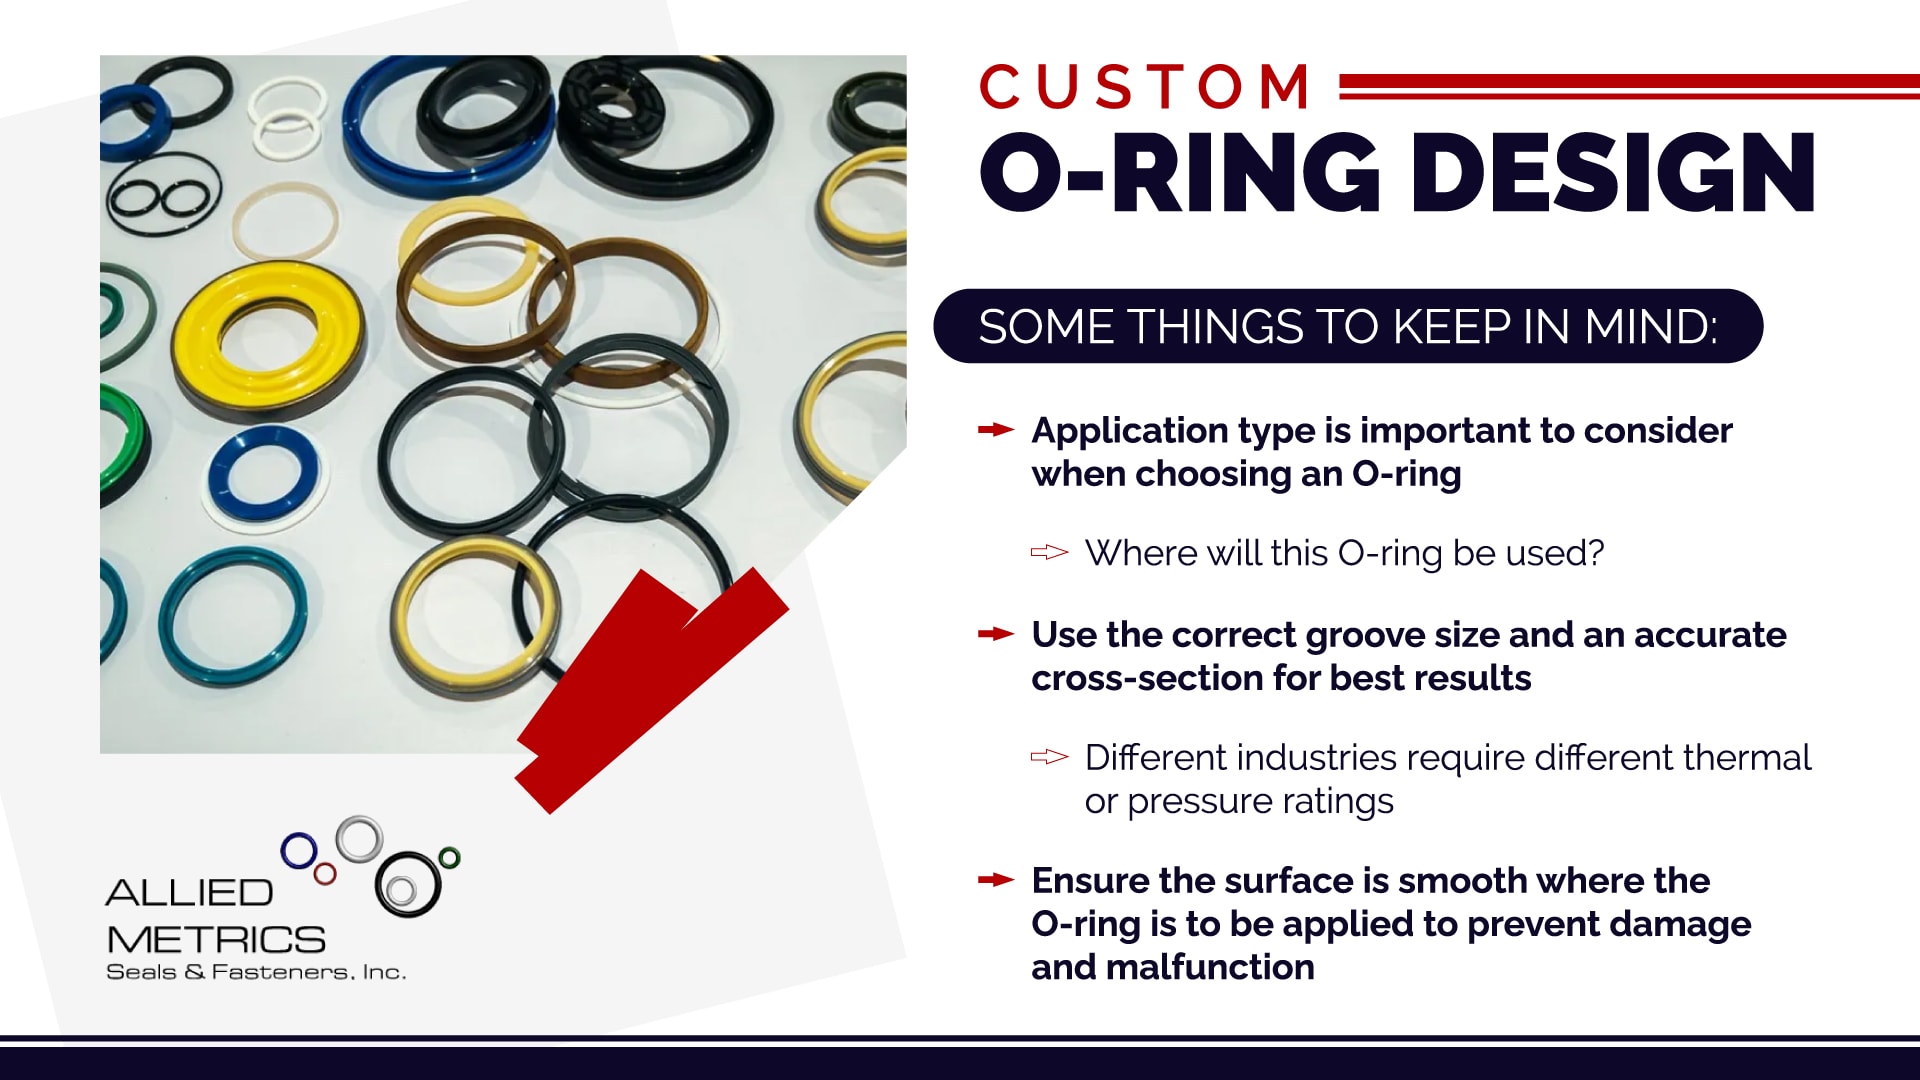 How to Select the Best Type of O-Ring